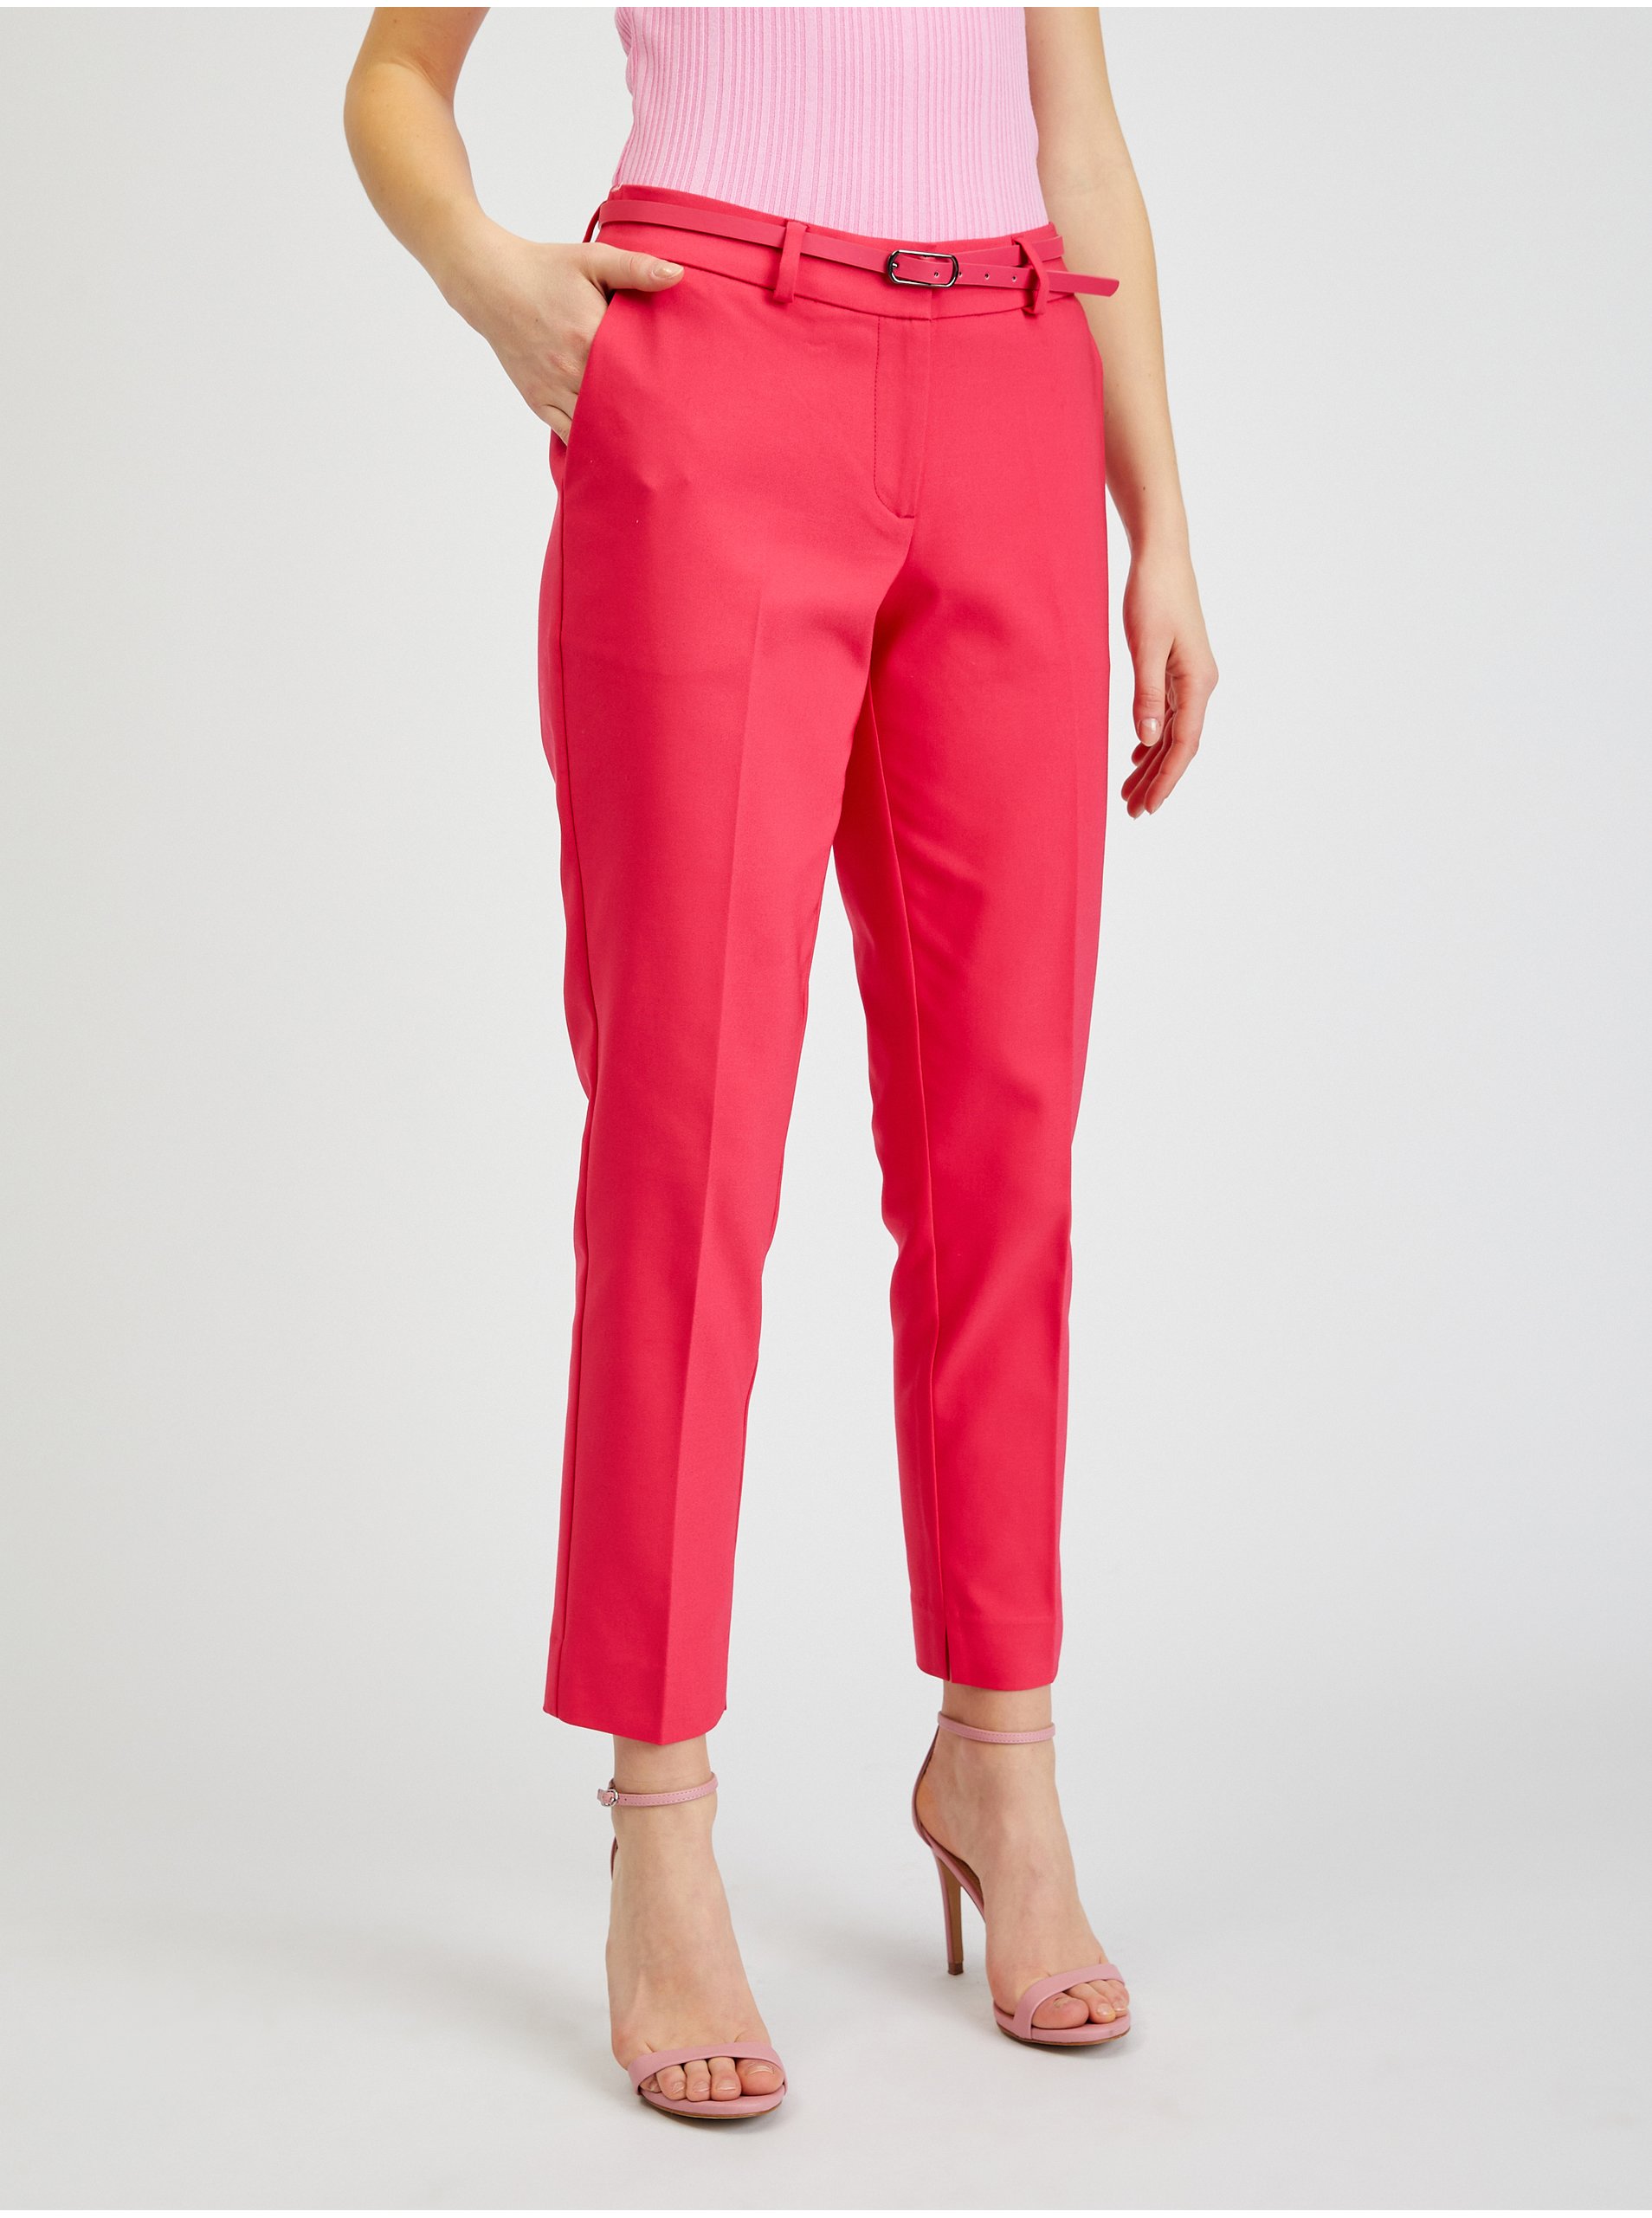 Orsay Dark Pink Womens Shortened Pants with Strap - Women